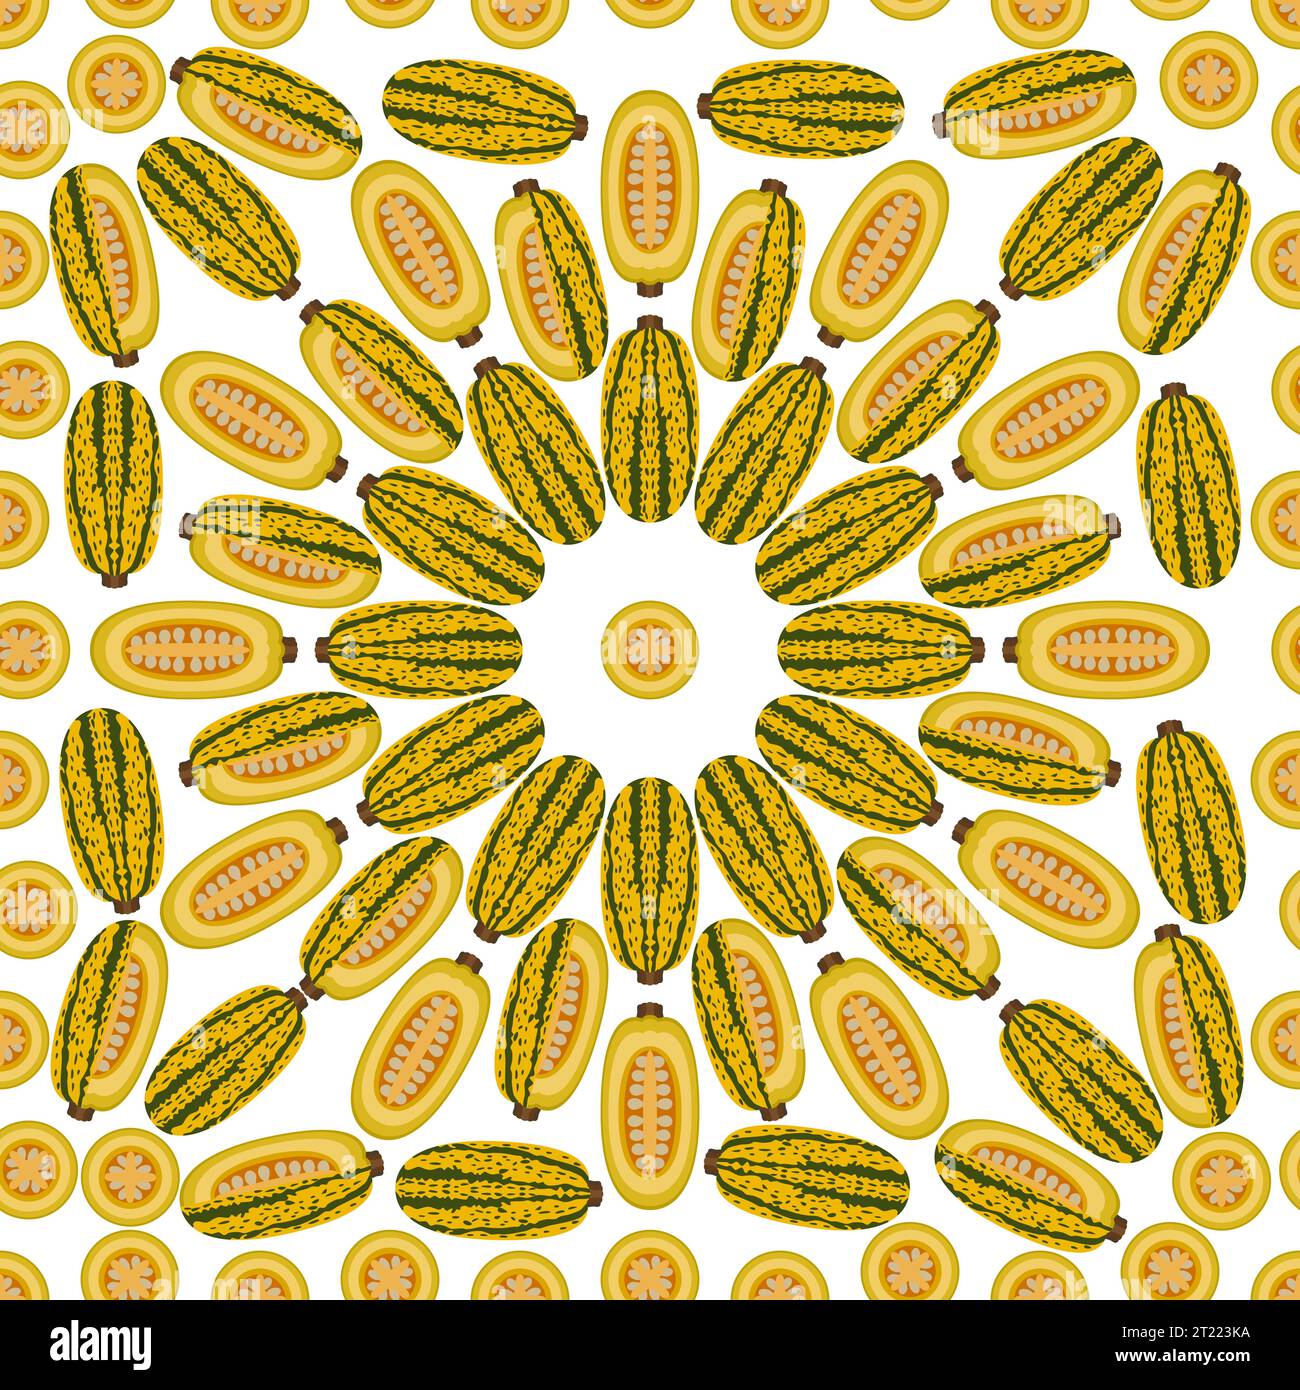 Seamless pattern with Courge Spaghetti winter Squash or Spaghetti squash. Fruit and vegetables. Flat style. Isolated vector illustration. Stock Vector